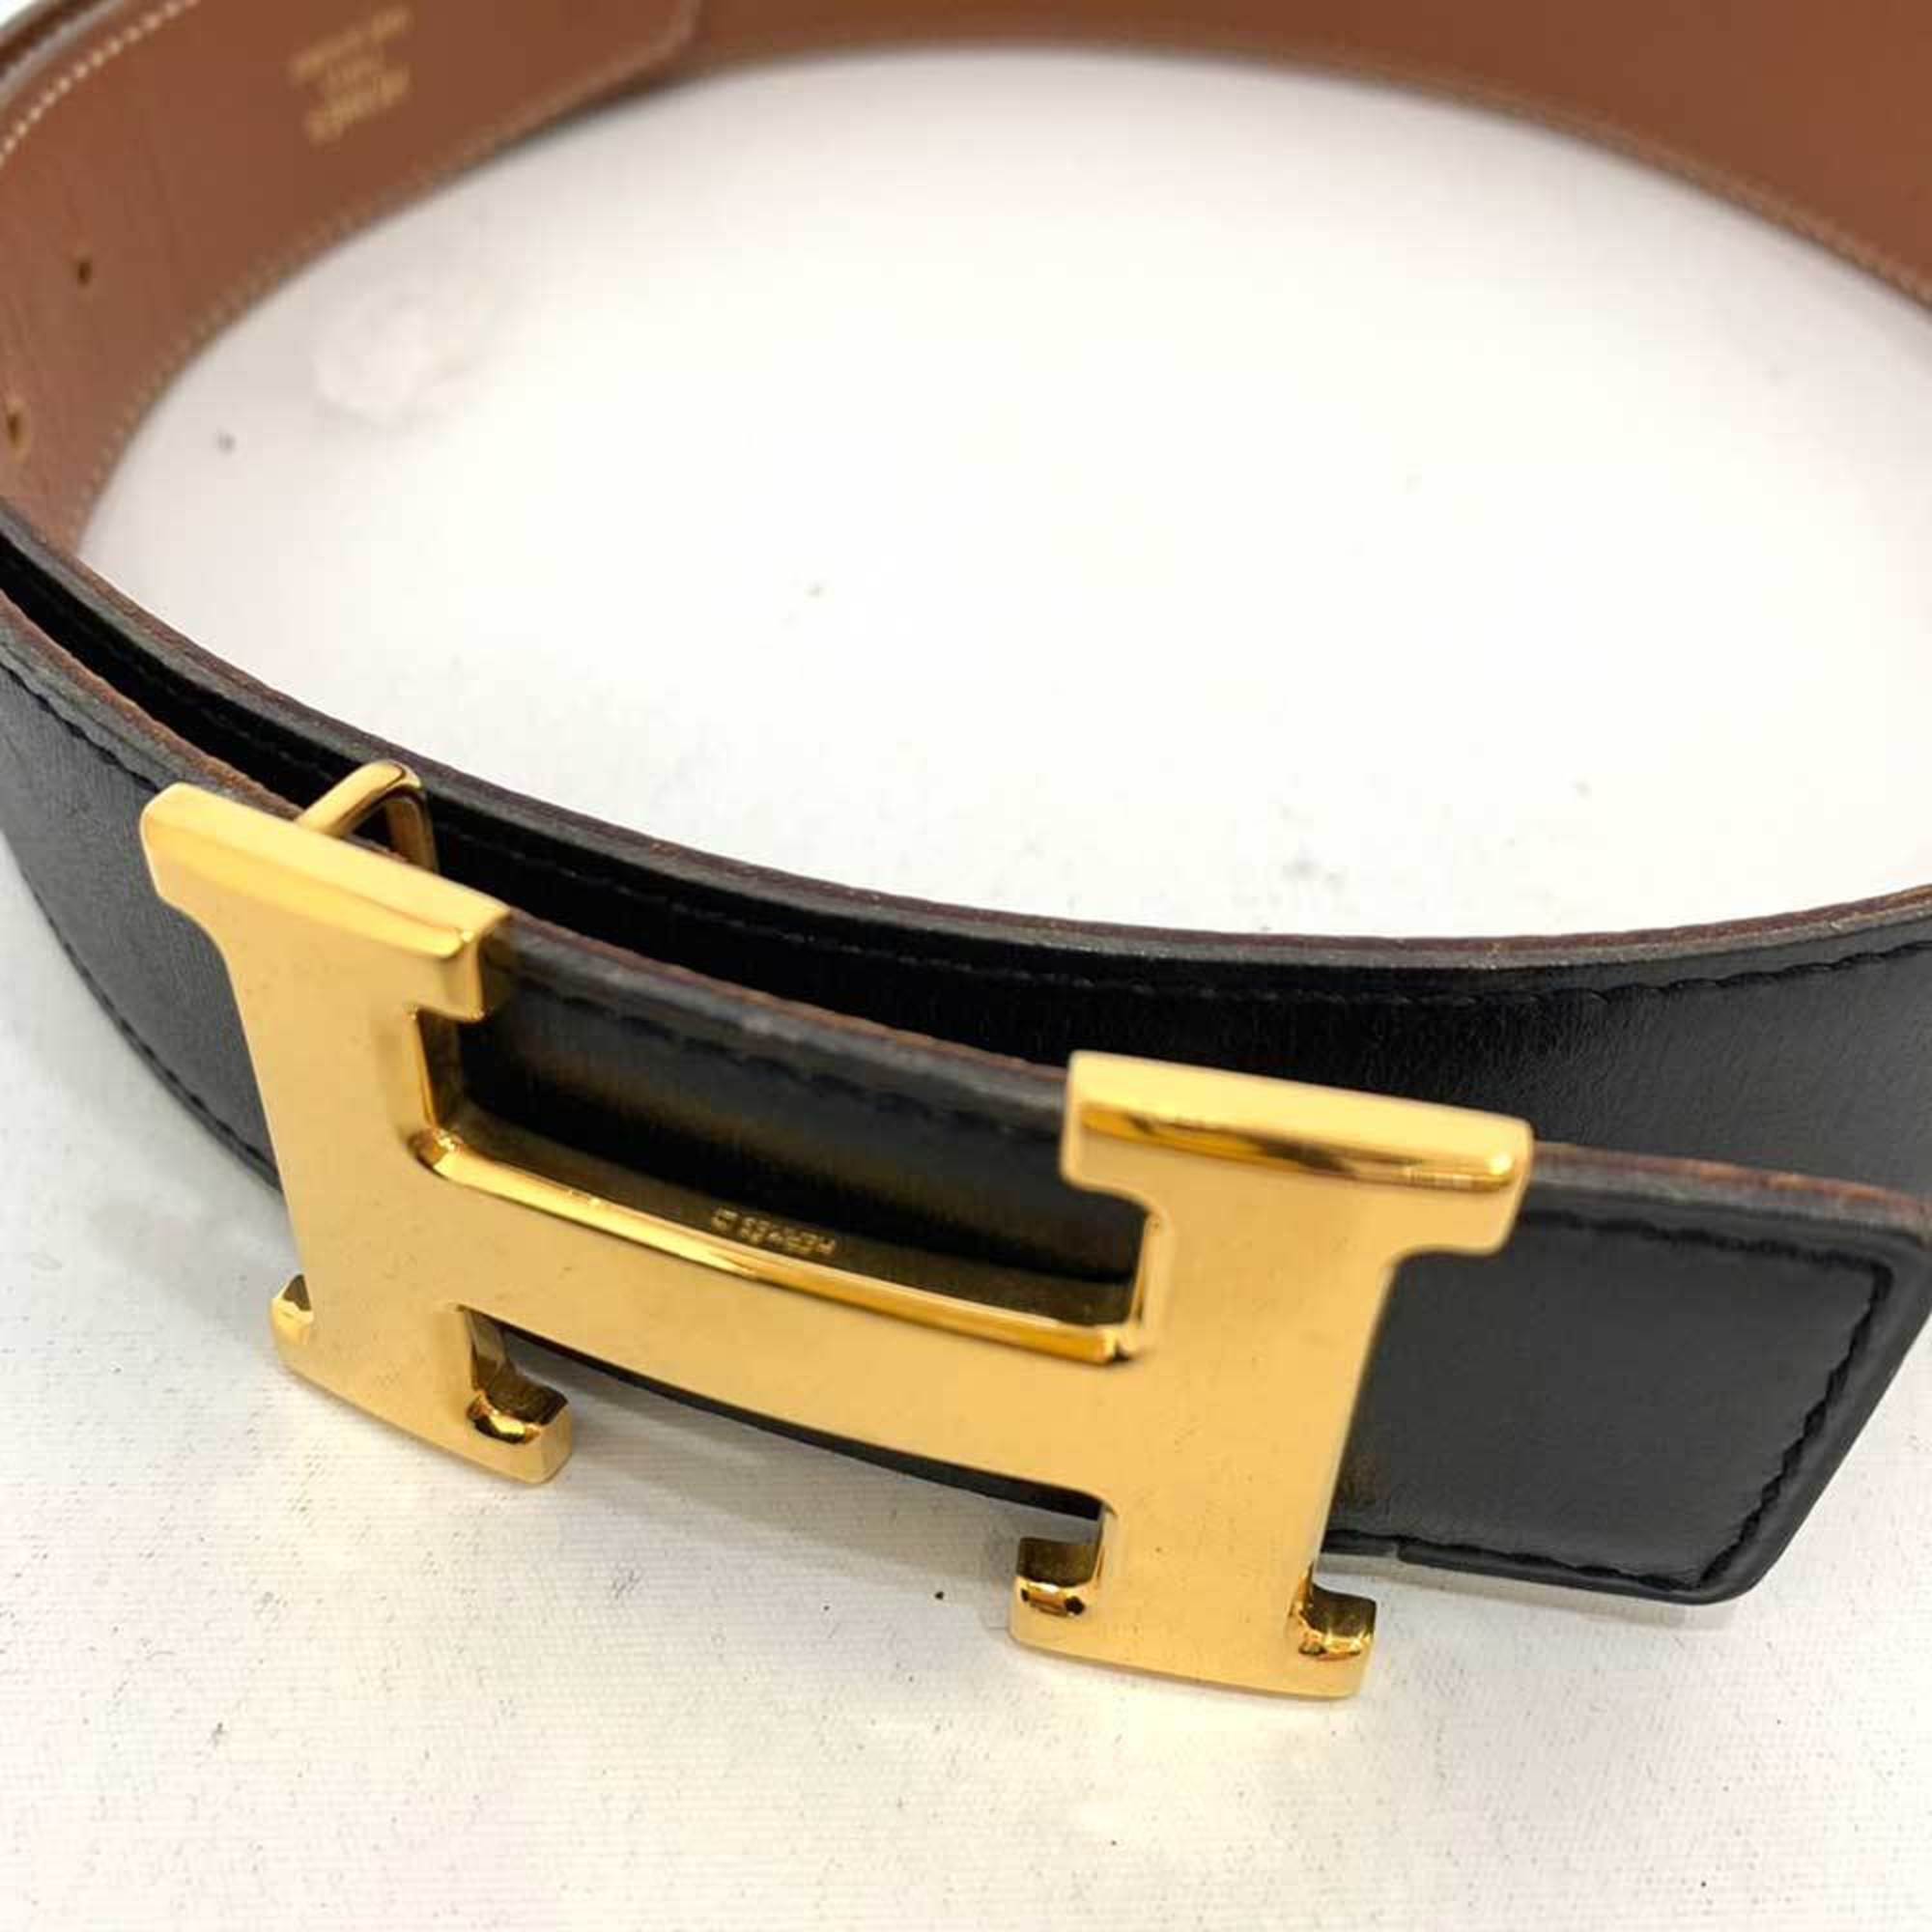 Hermes Accessories Constance H Belt Size 70 Reversible Black x Brown Ladies Box Calf Couchebell Leather HERMES